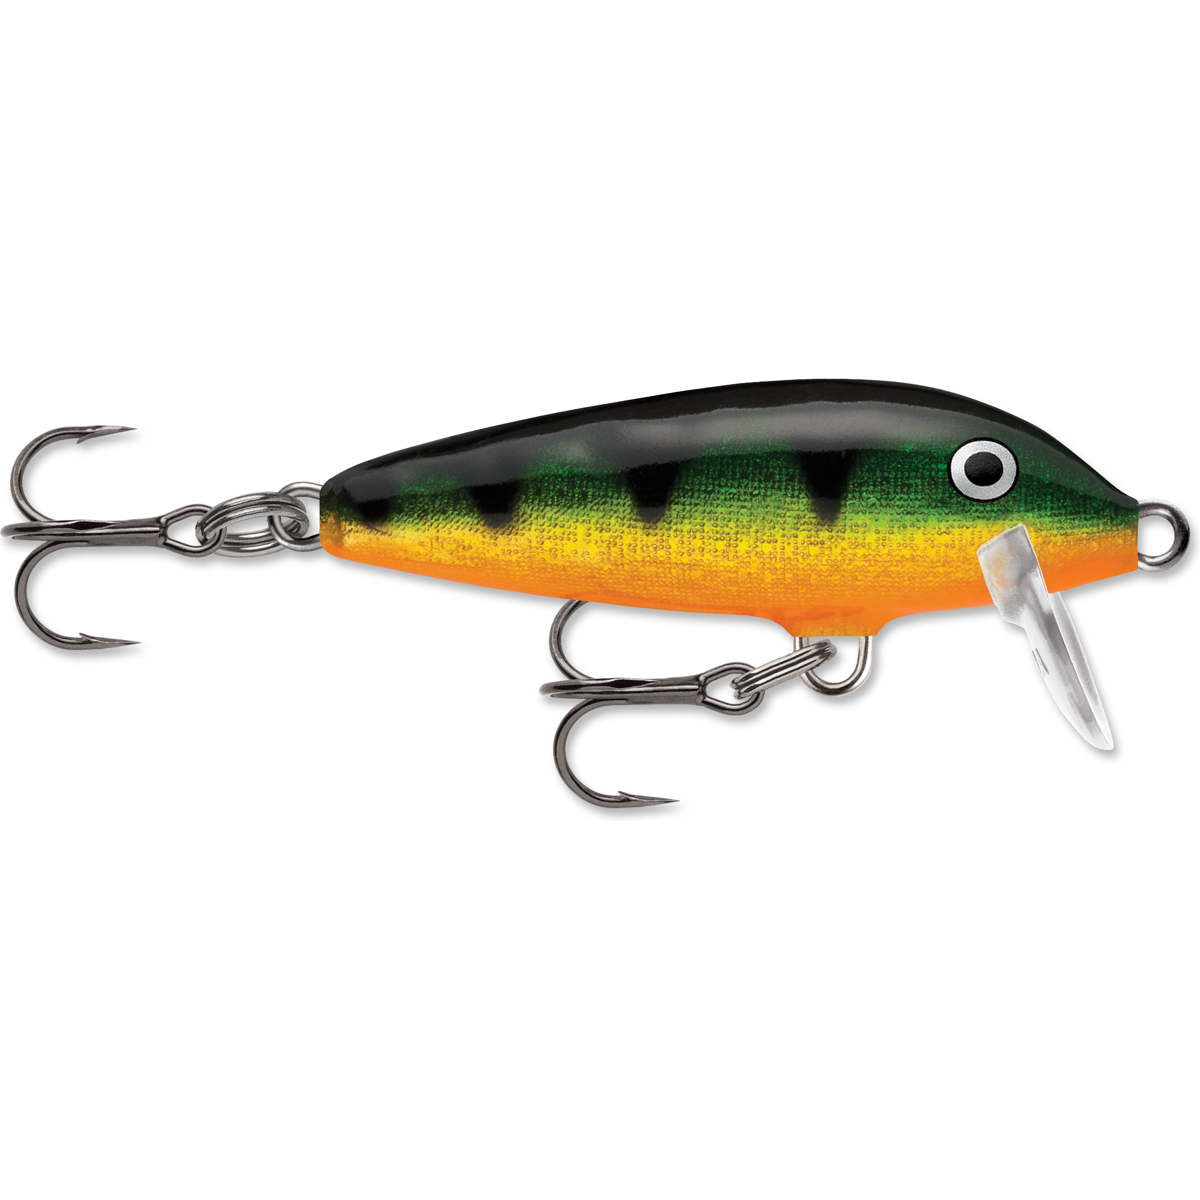 Photo of Rapala Original Floating Lure - Small for sale at United Tackle Shops.